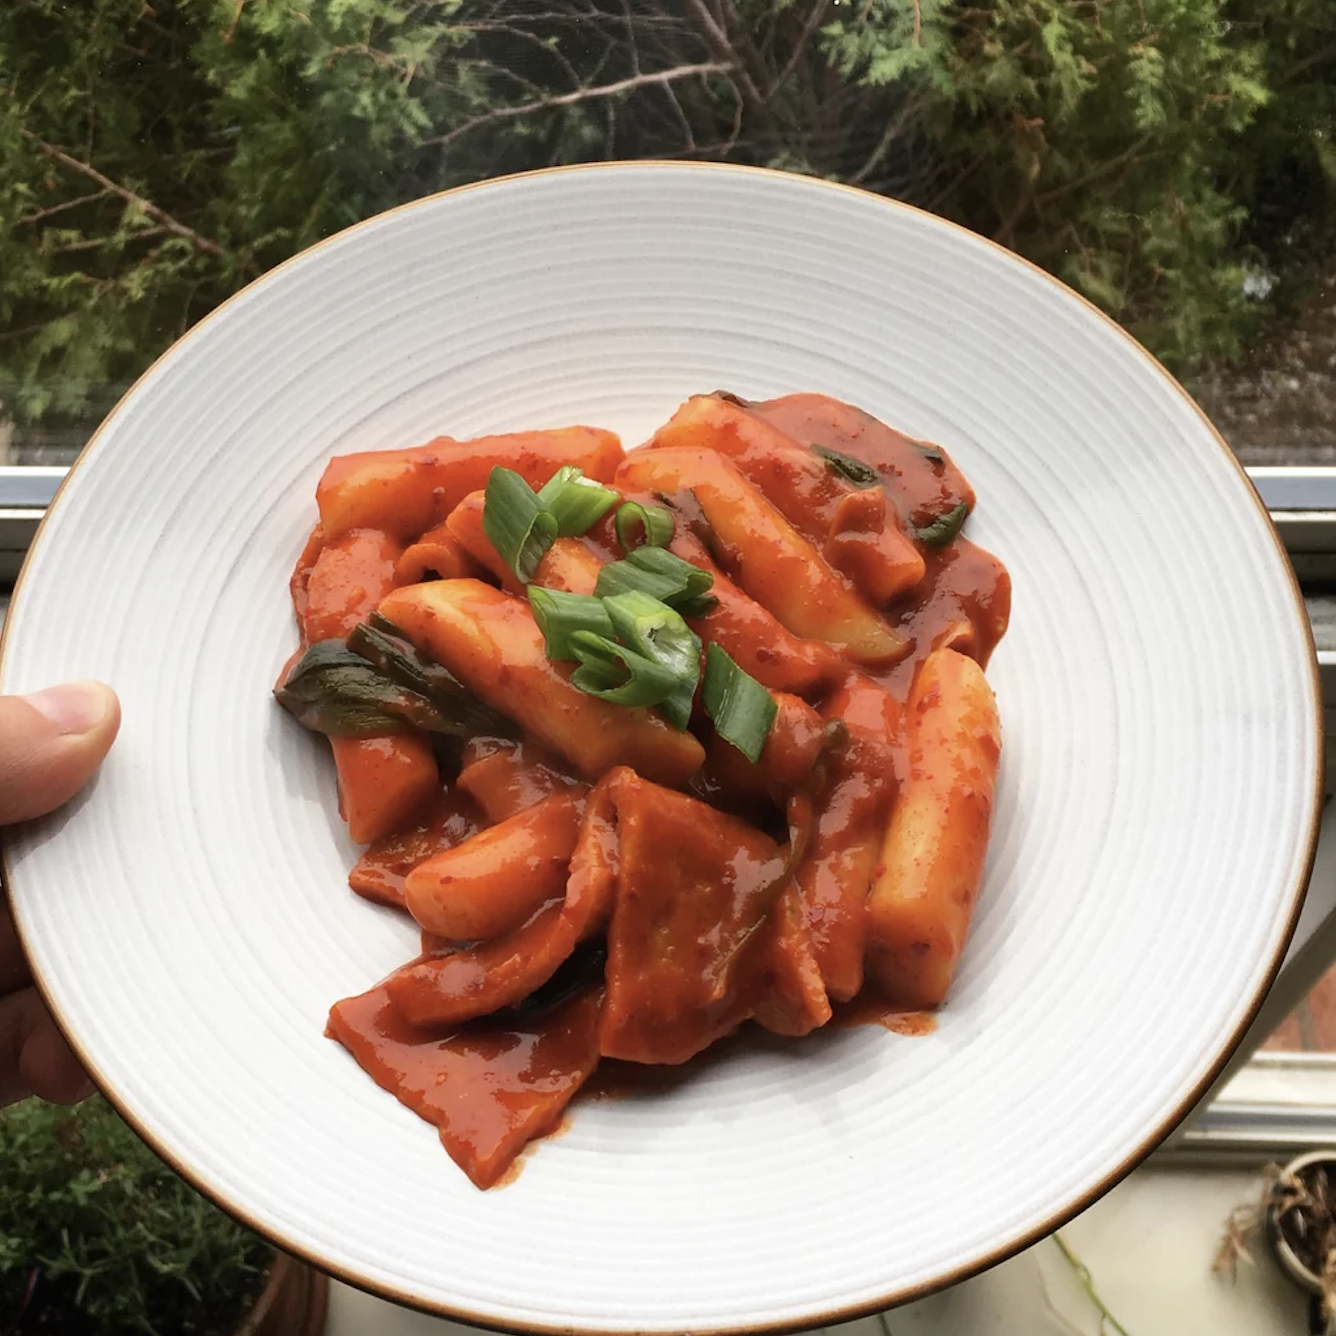 A hand holds a plate with penne pasta and tomato sauce garnished with green herbs